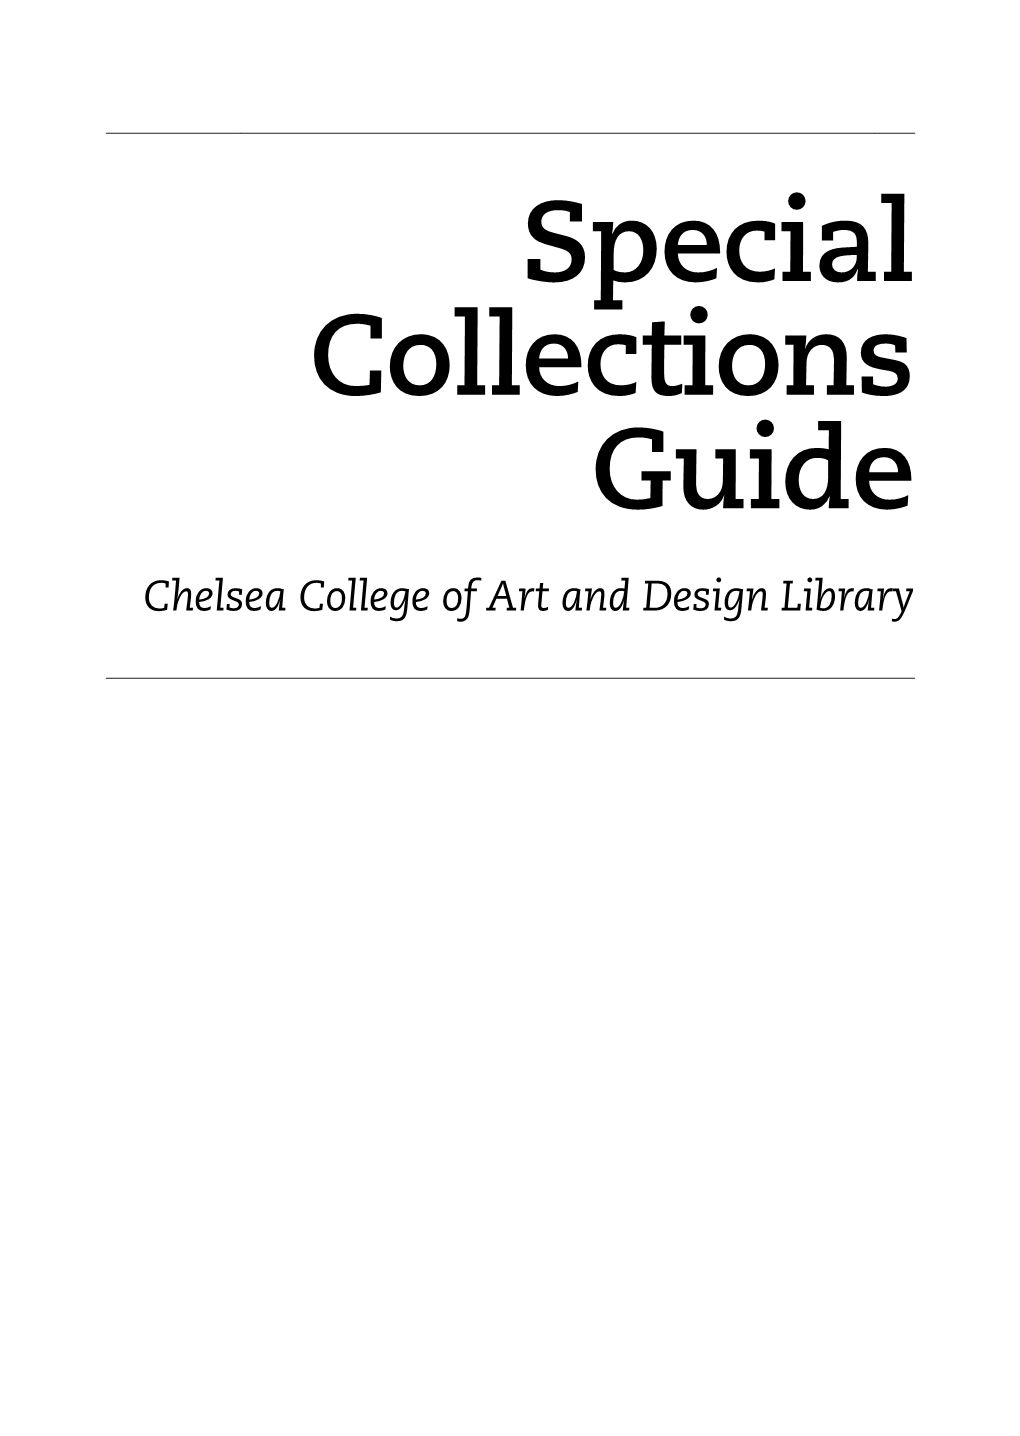 Special Collections Guide Chelsea College of Art and Design Library